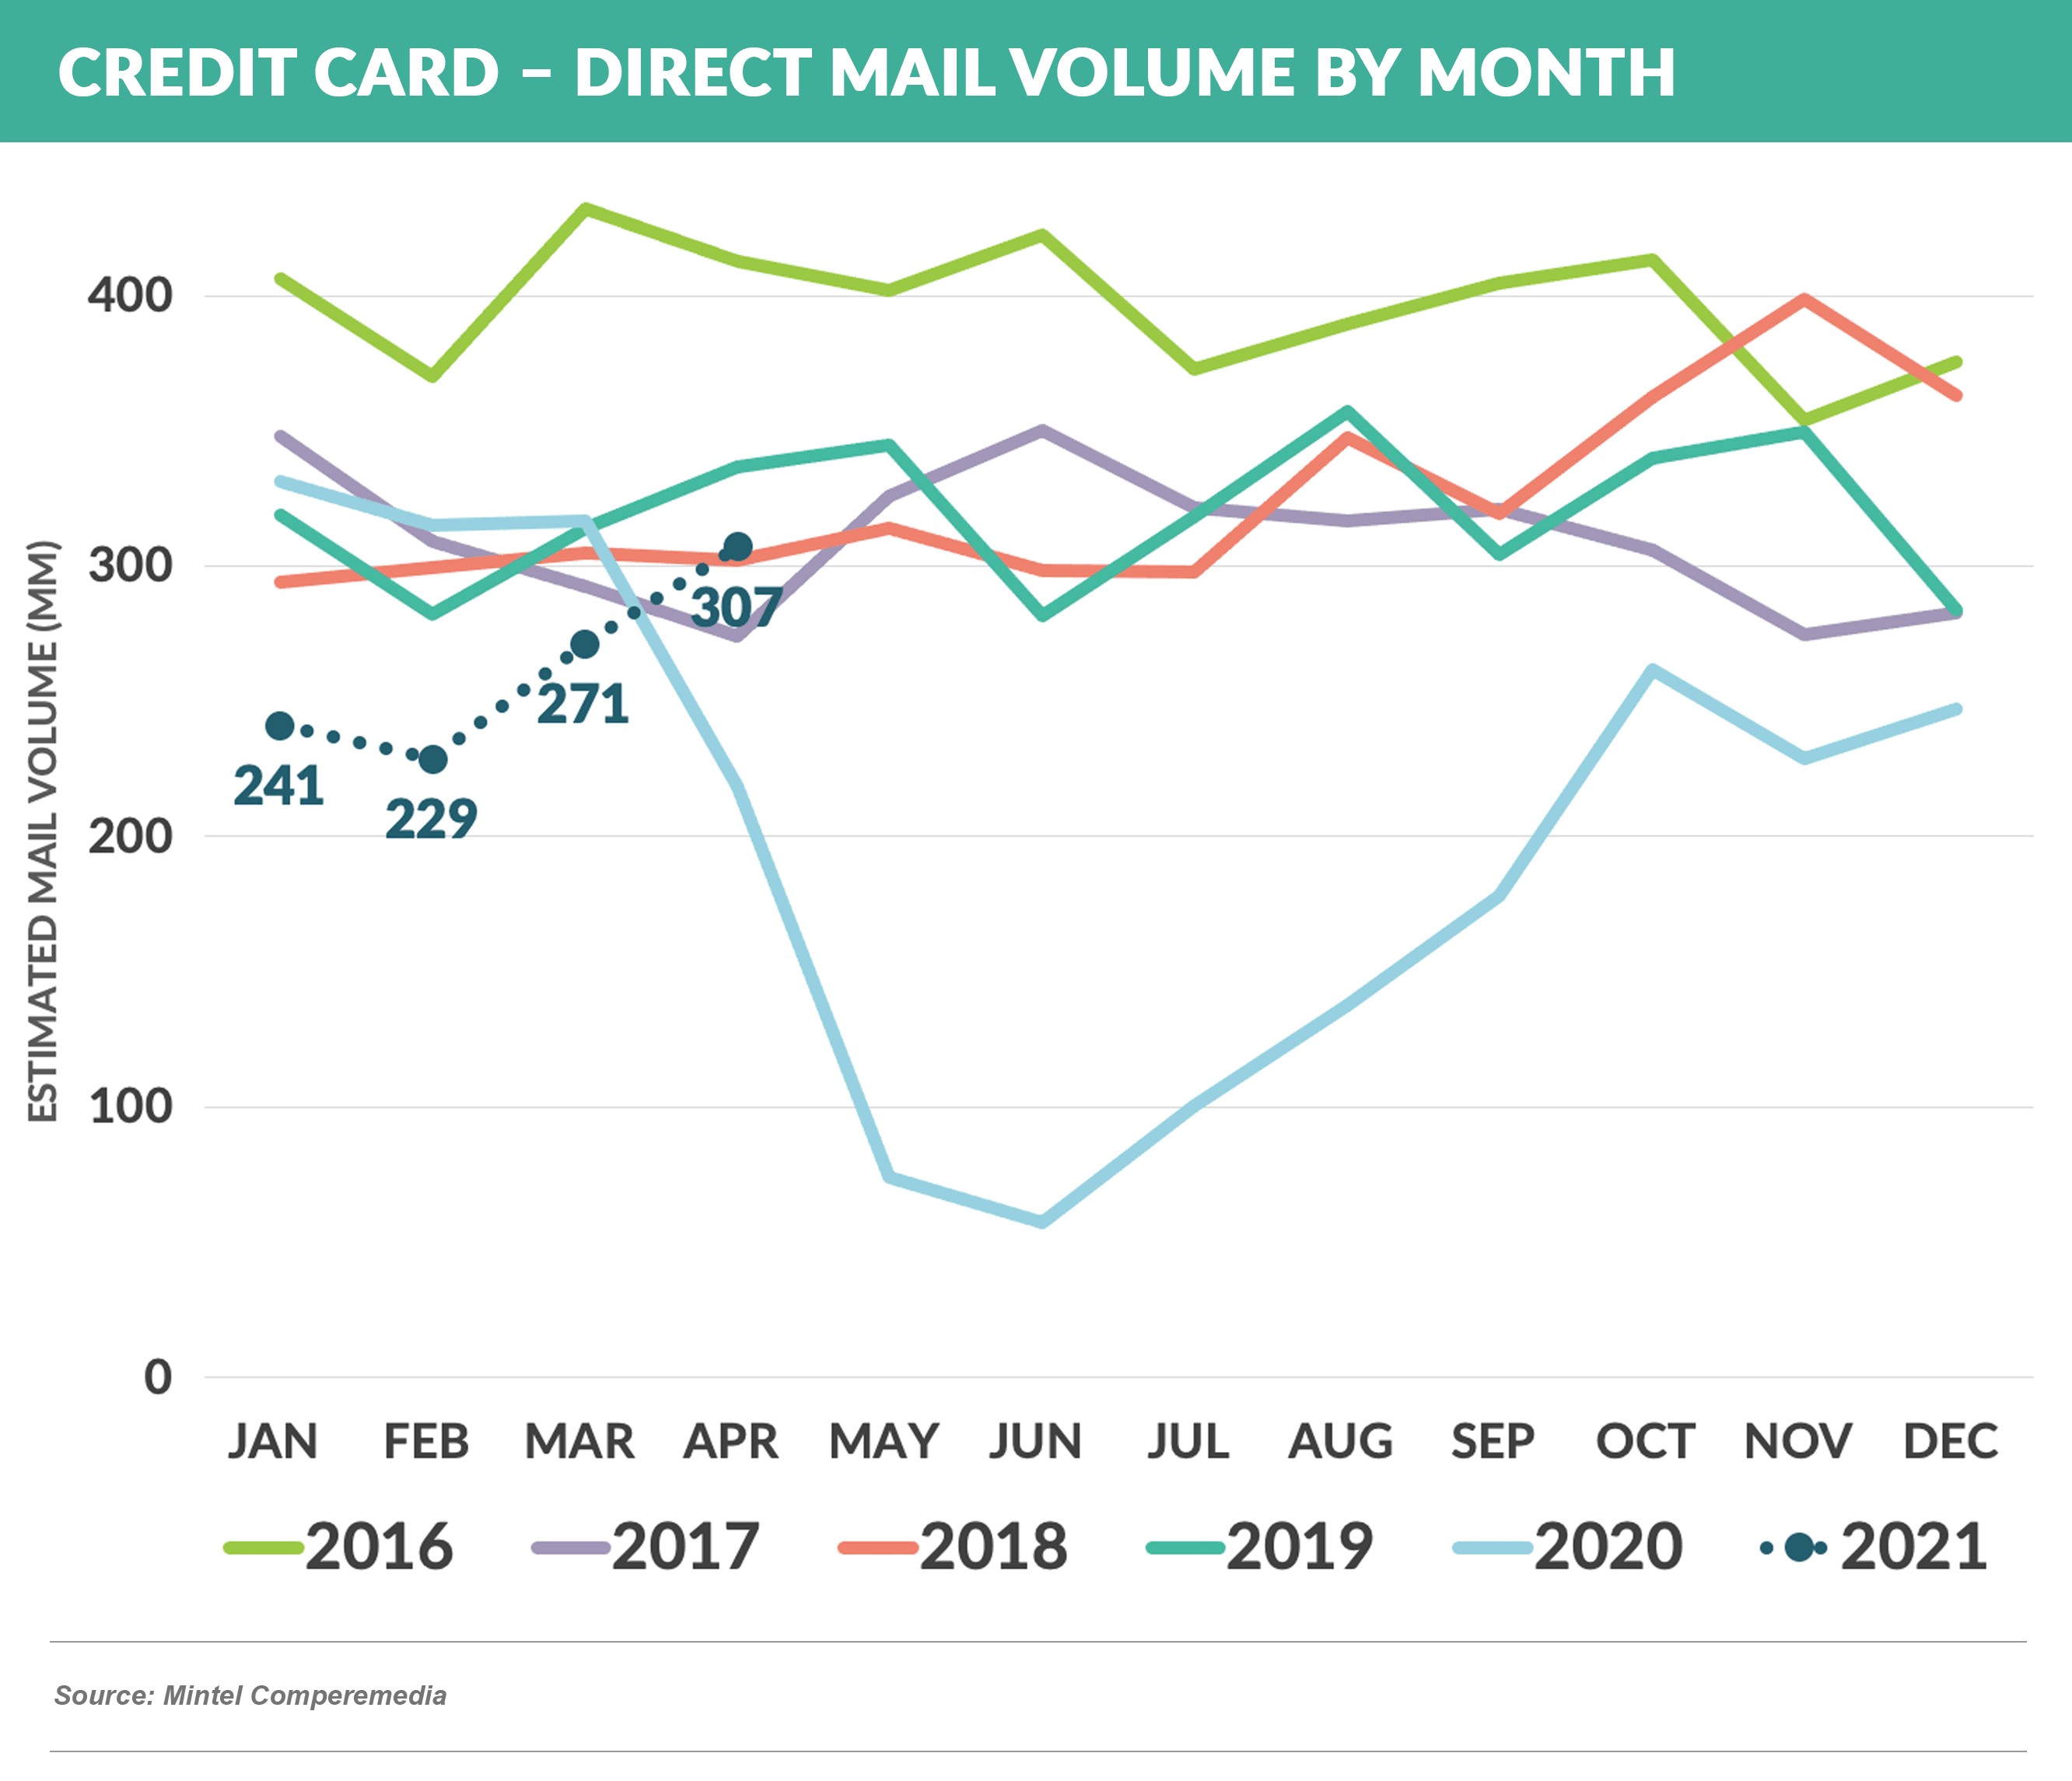 Credit Card – Direct Mail Volume by Month 20210605